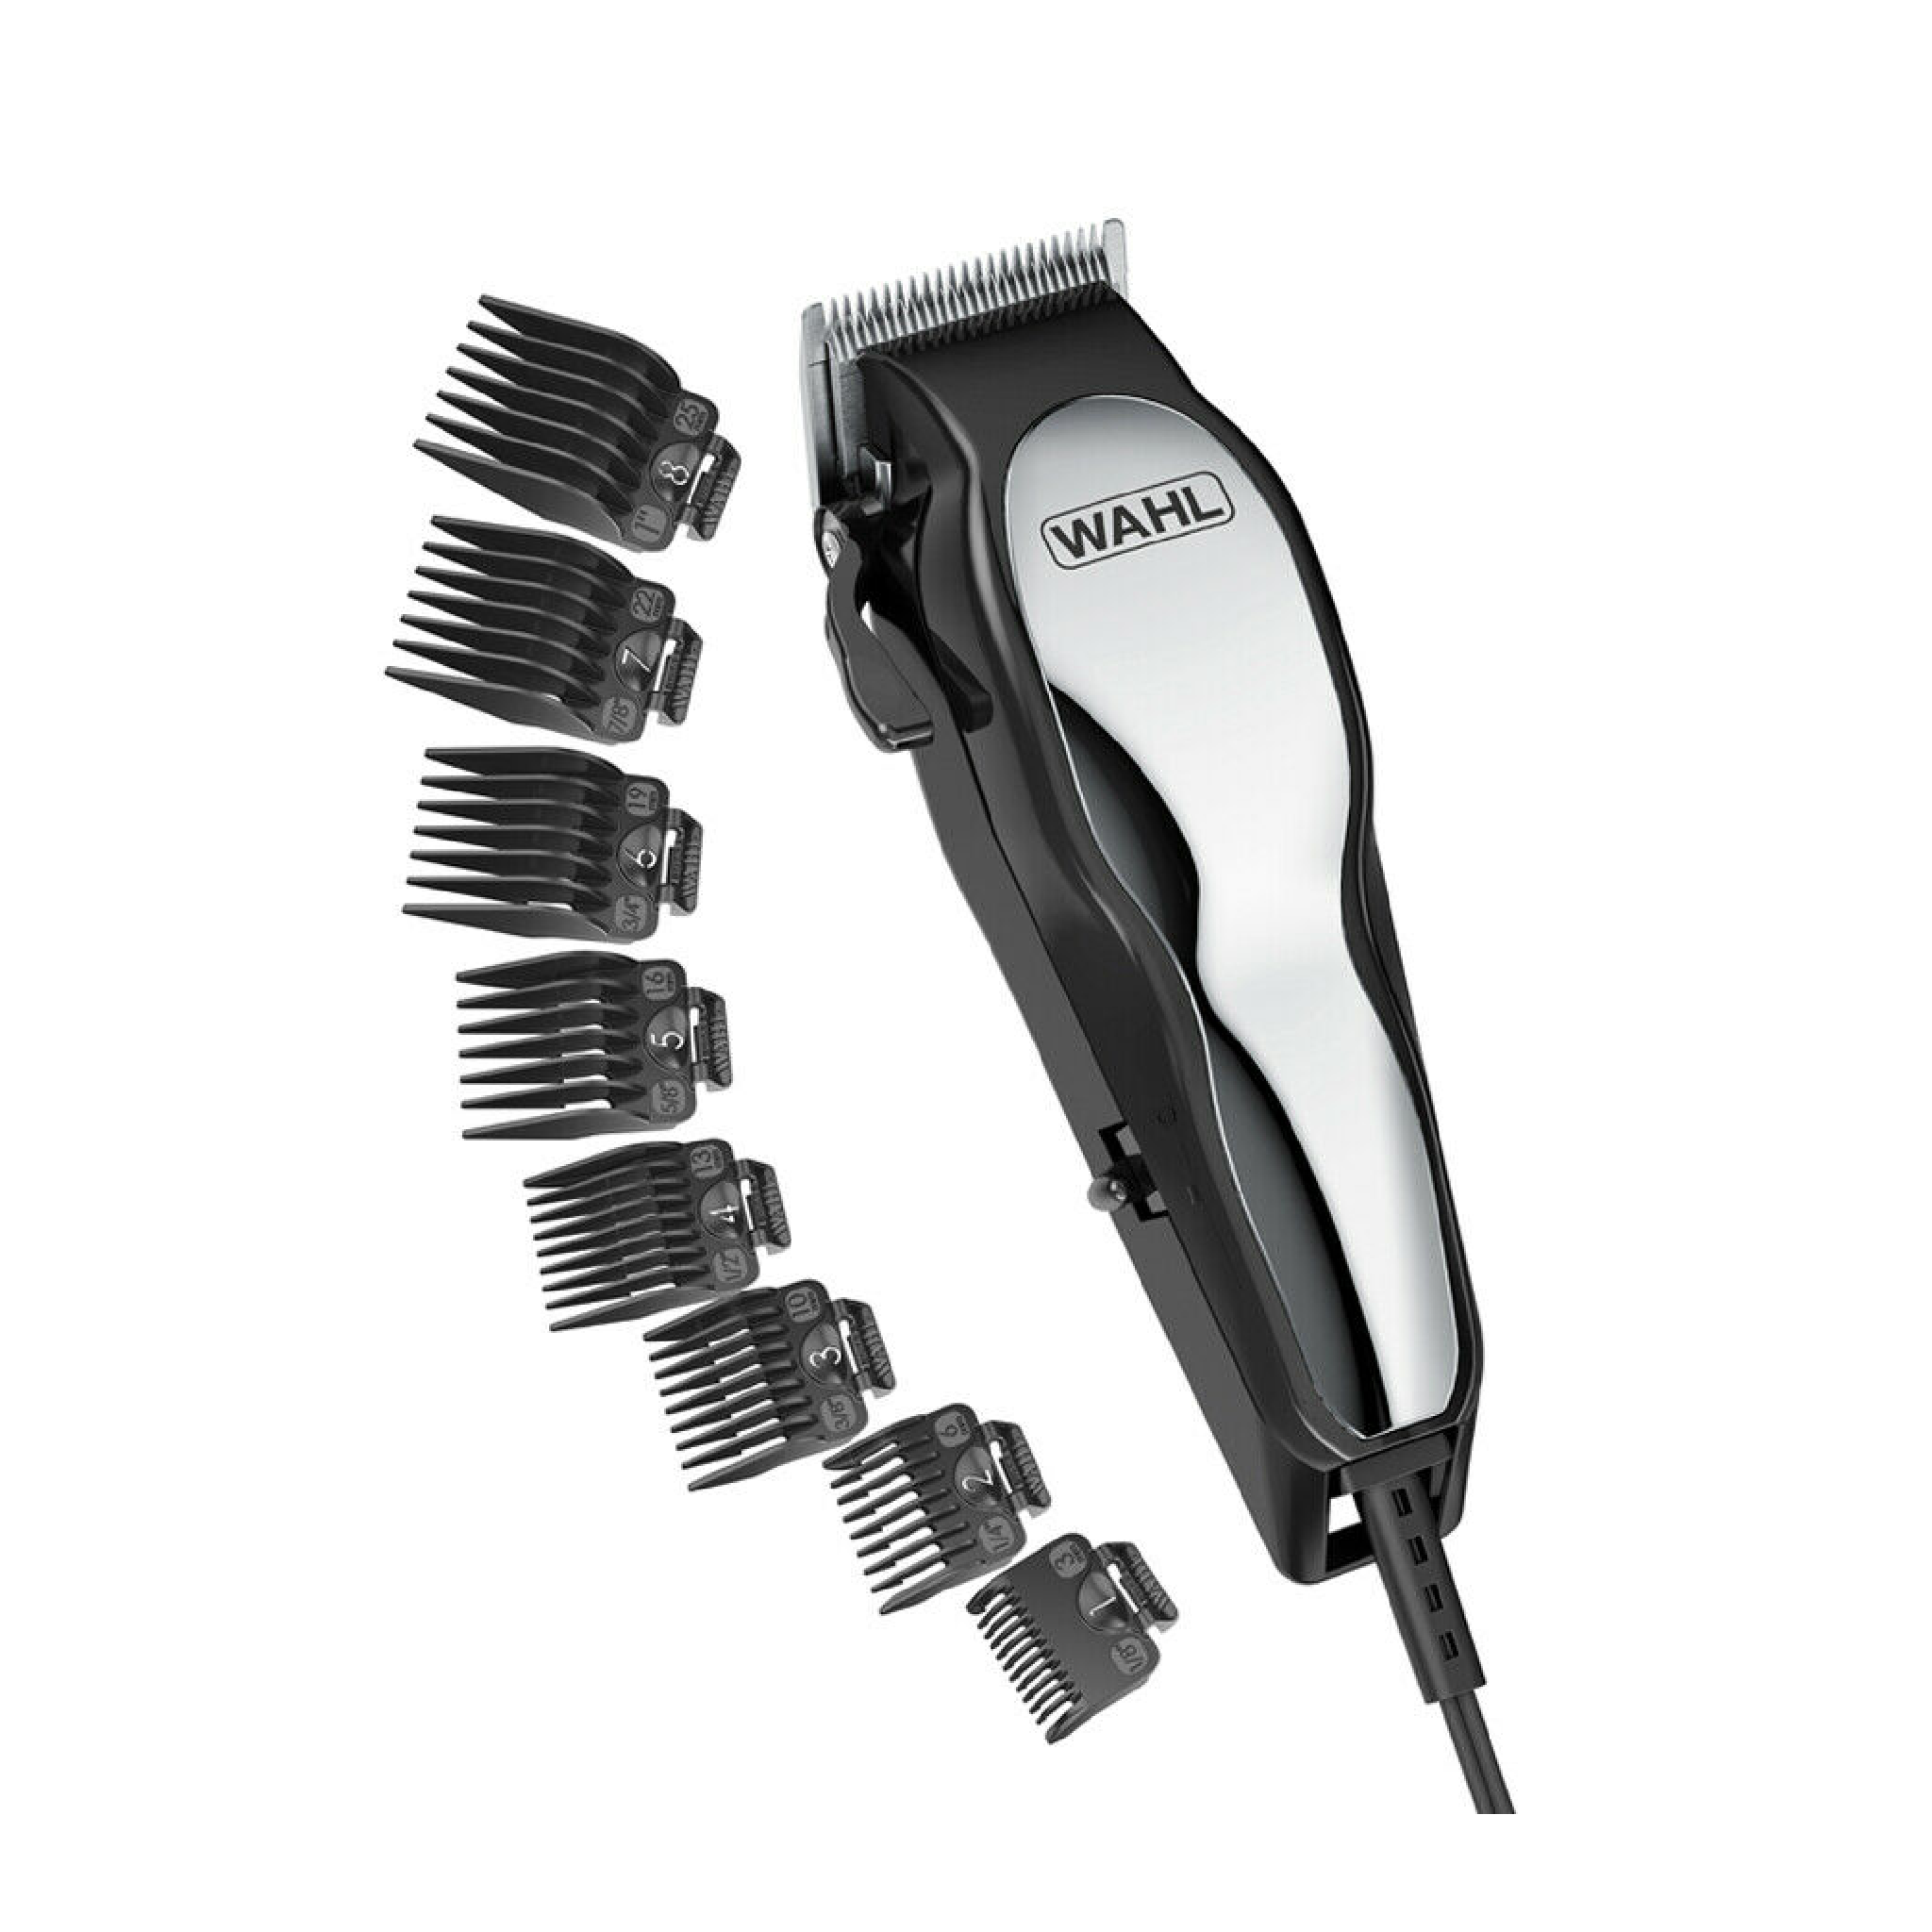 Wahl Chrome Pro Complete Haircutting Kit for Men